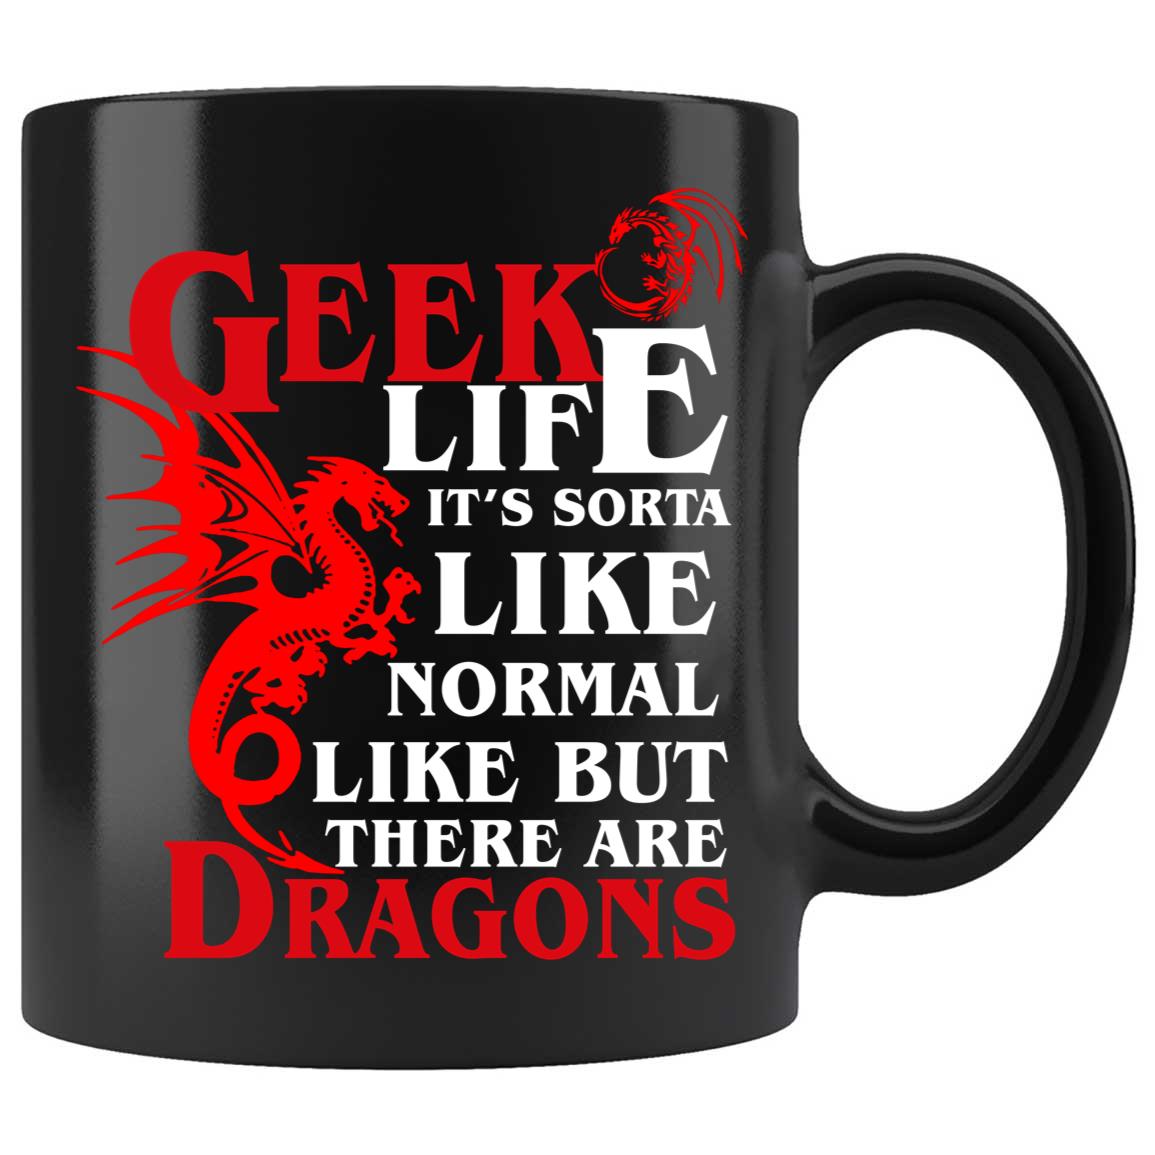 Skitongifts Coffee Mug Funny Ceramic Novelty M97-NH271121-Geek Life It's Like Normal Life Except With Dragons Gsx6Ima